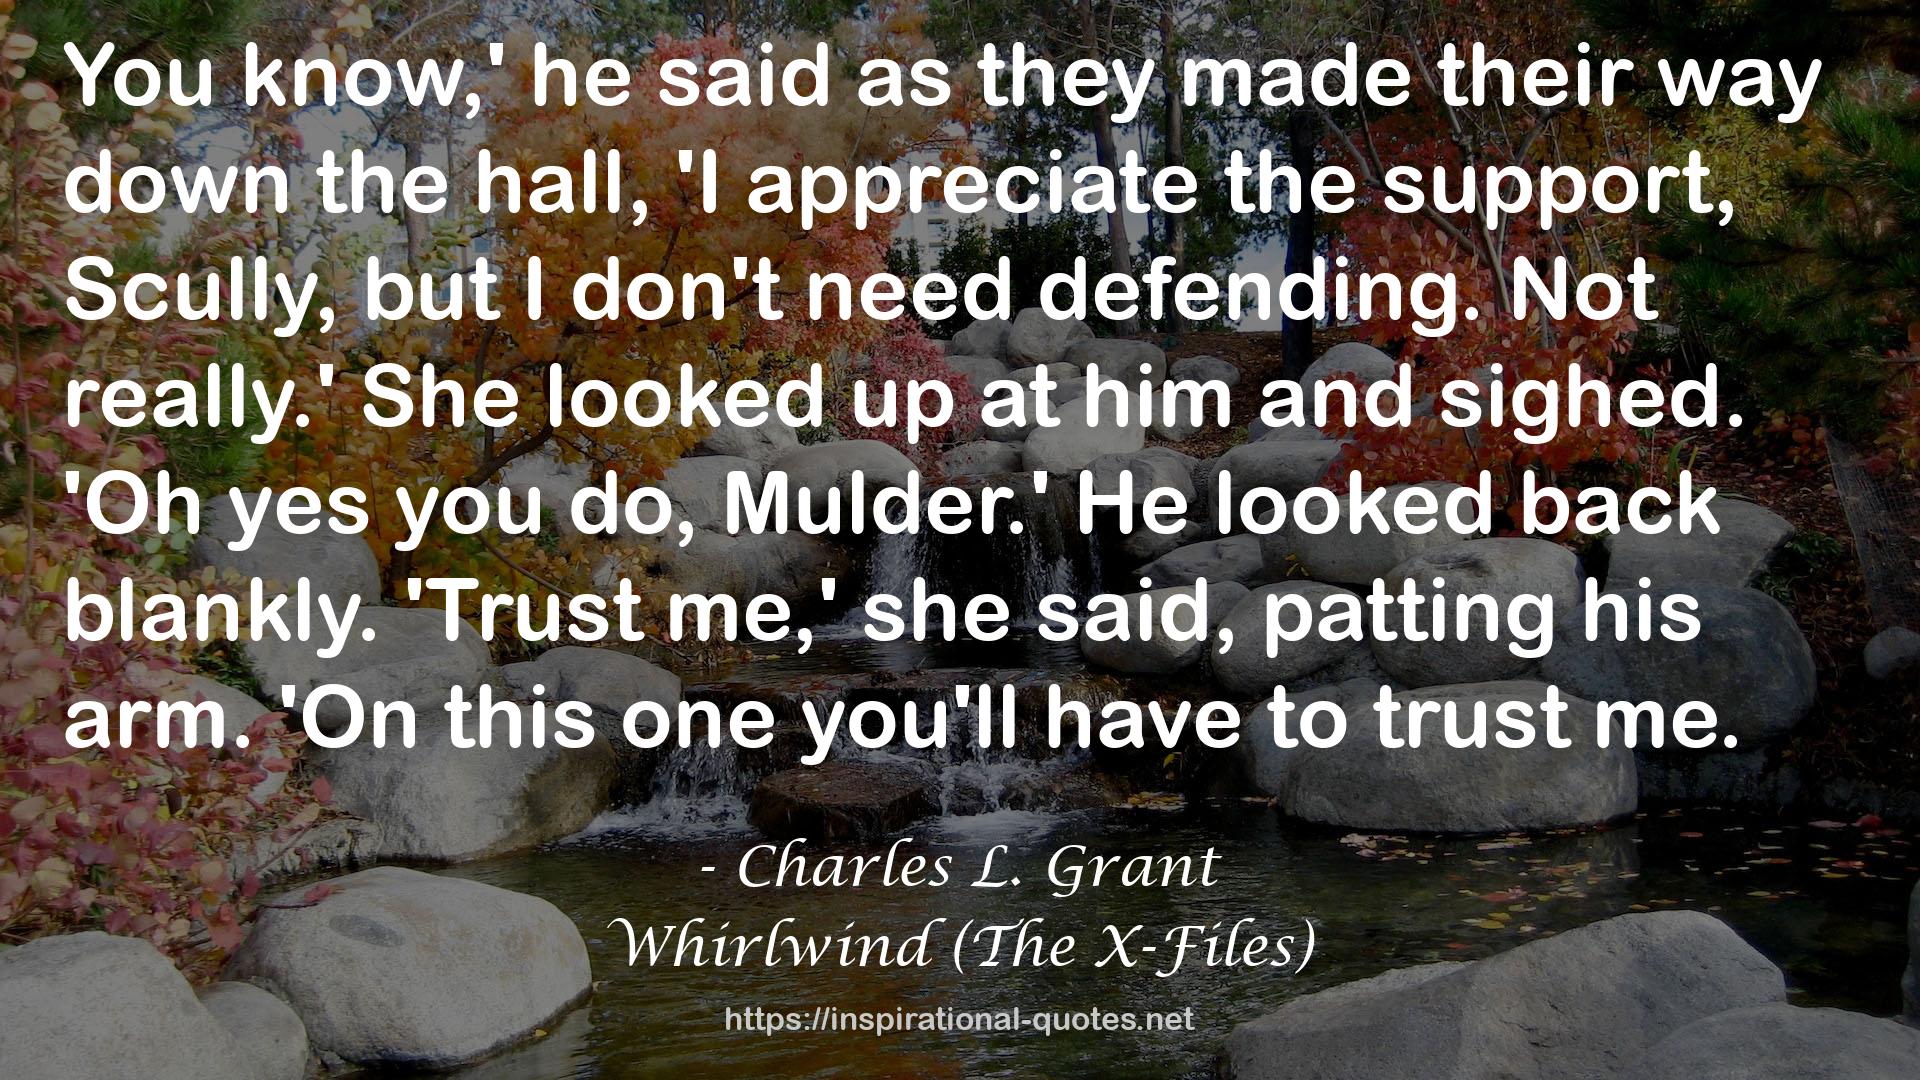 Charles L. Grant QUOTES